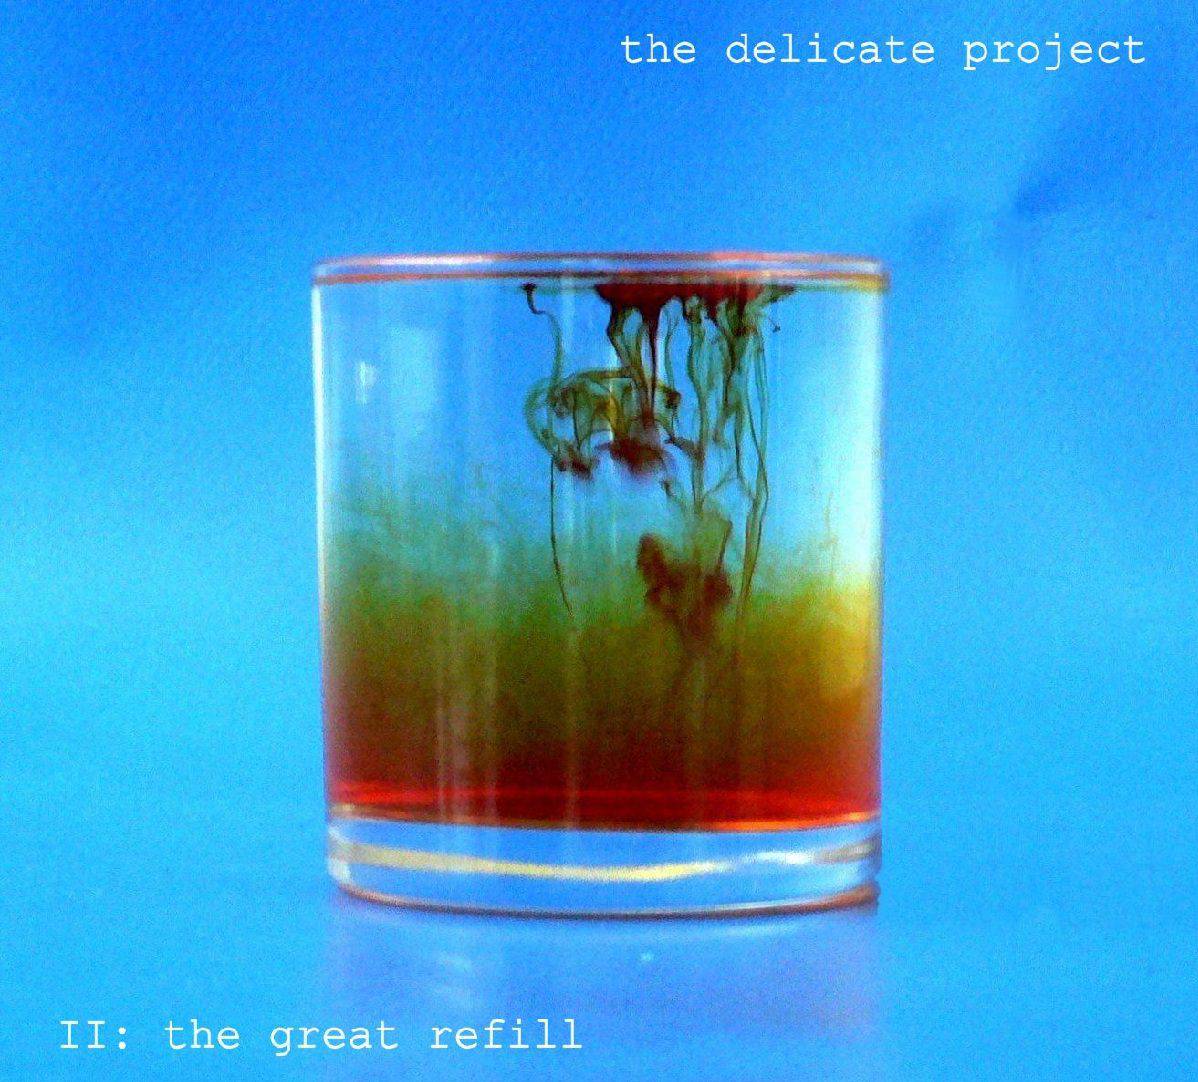 The delicate project